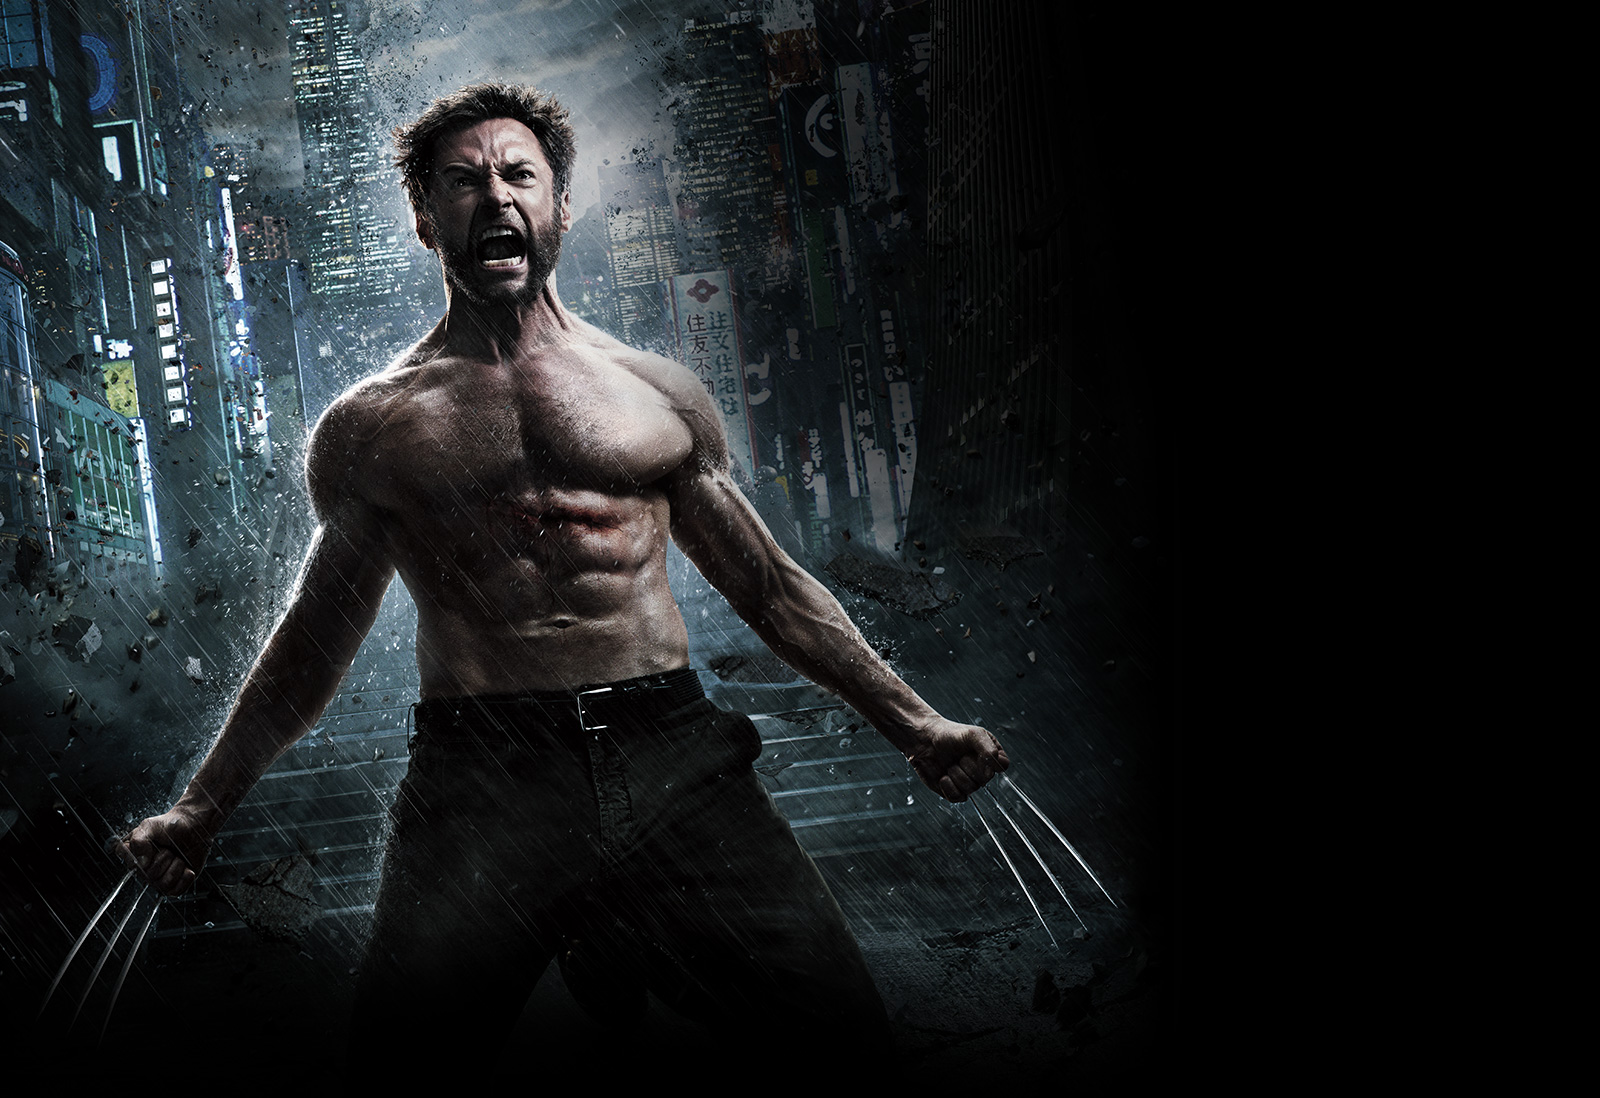 The Wolverine HD Wallpaper